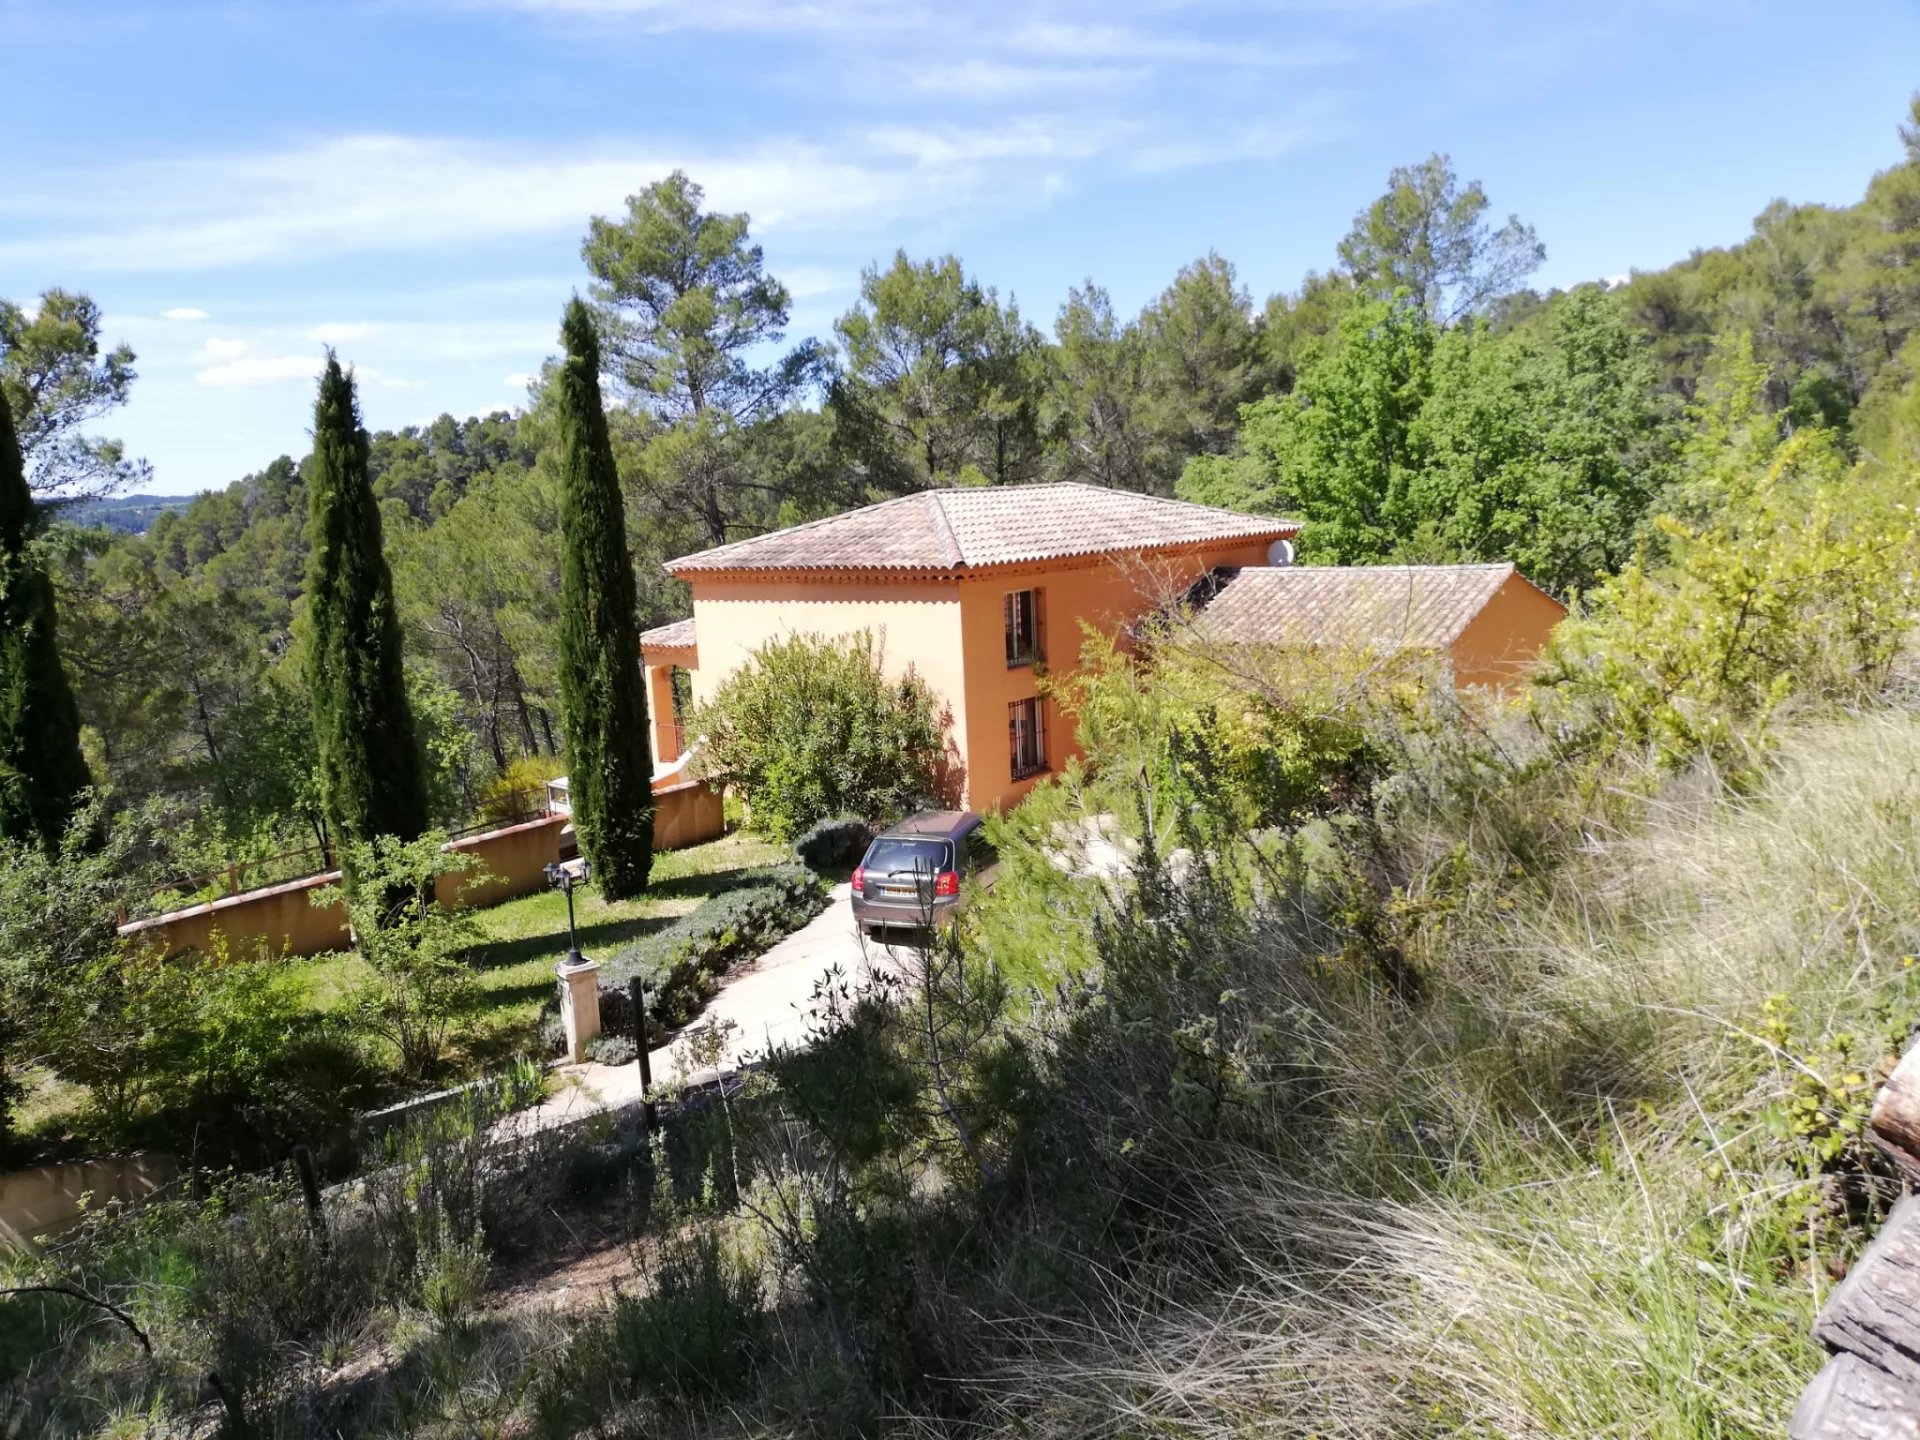 BARJOLS - 4-bedroom Villa with a pool, 8 052m2 of land, and an independent 6-person cottage/gîte